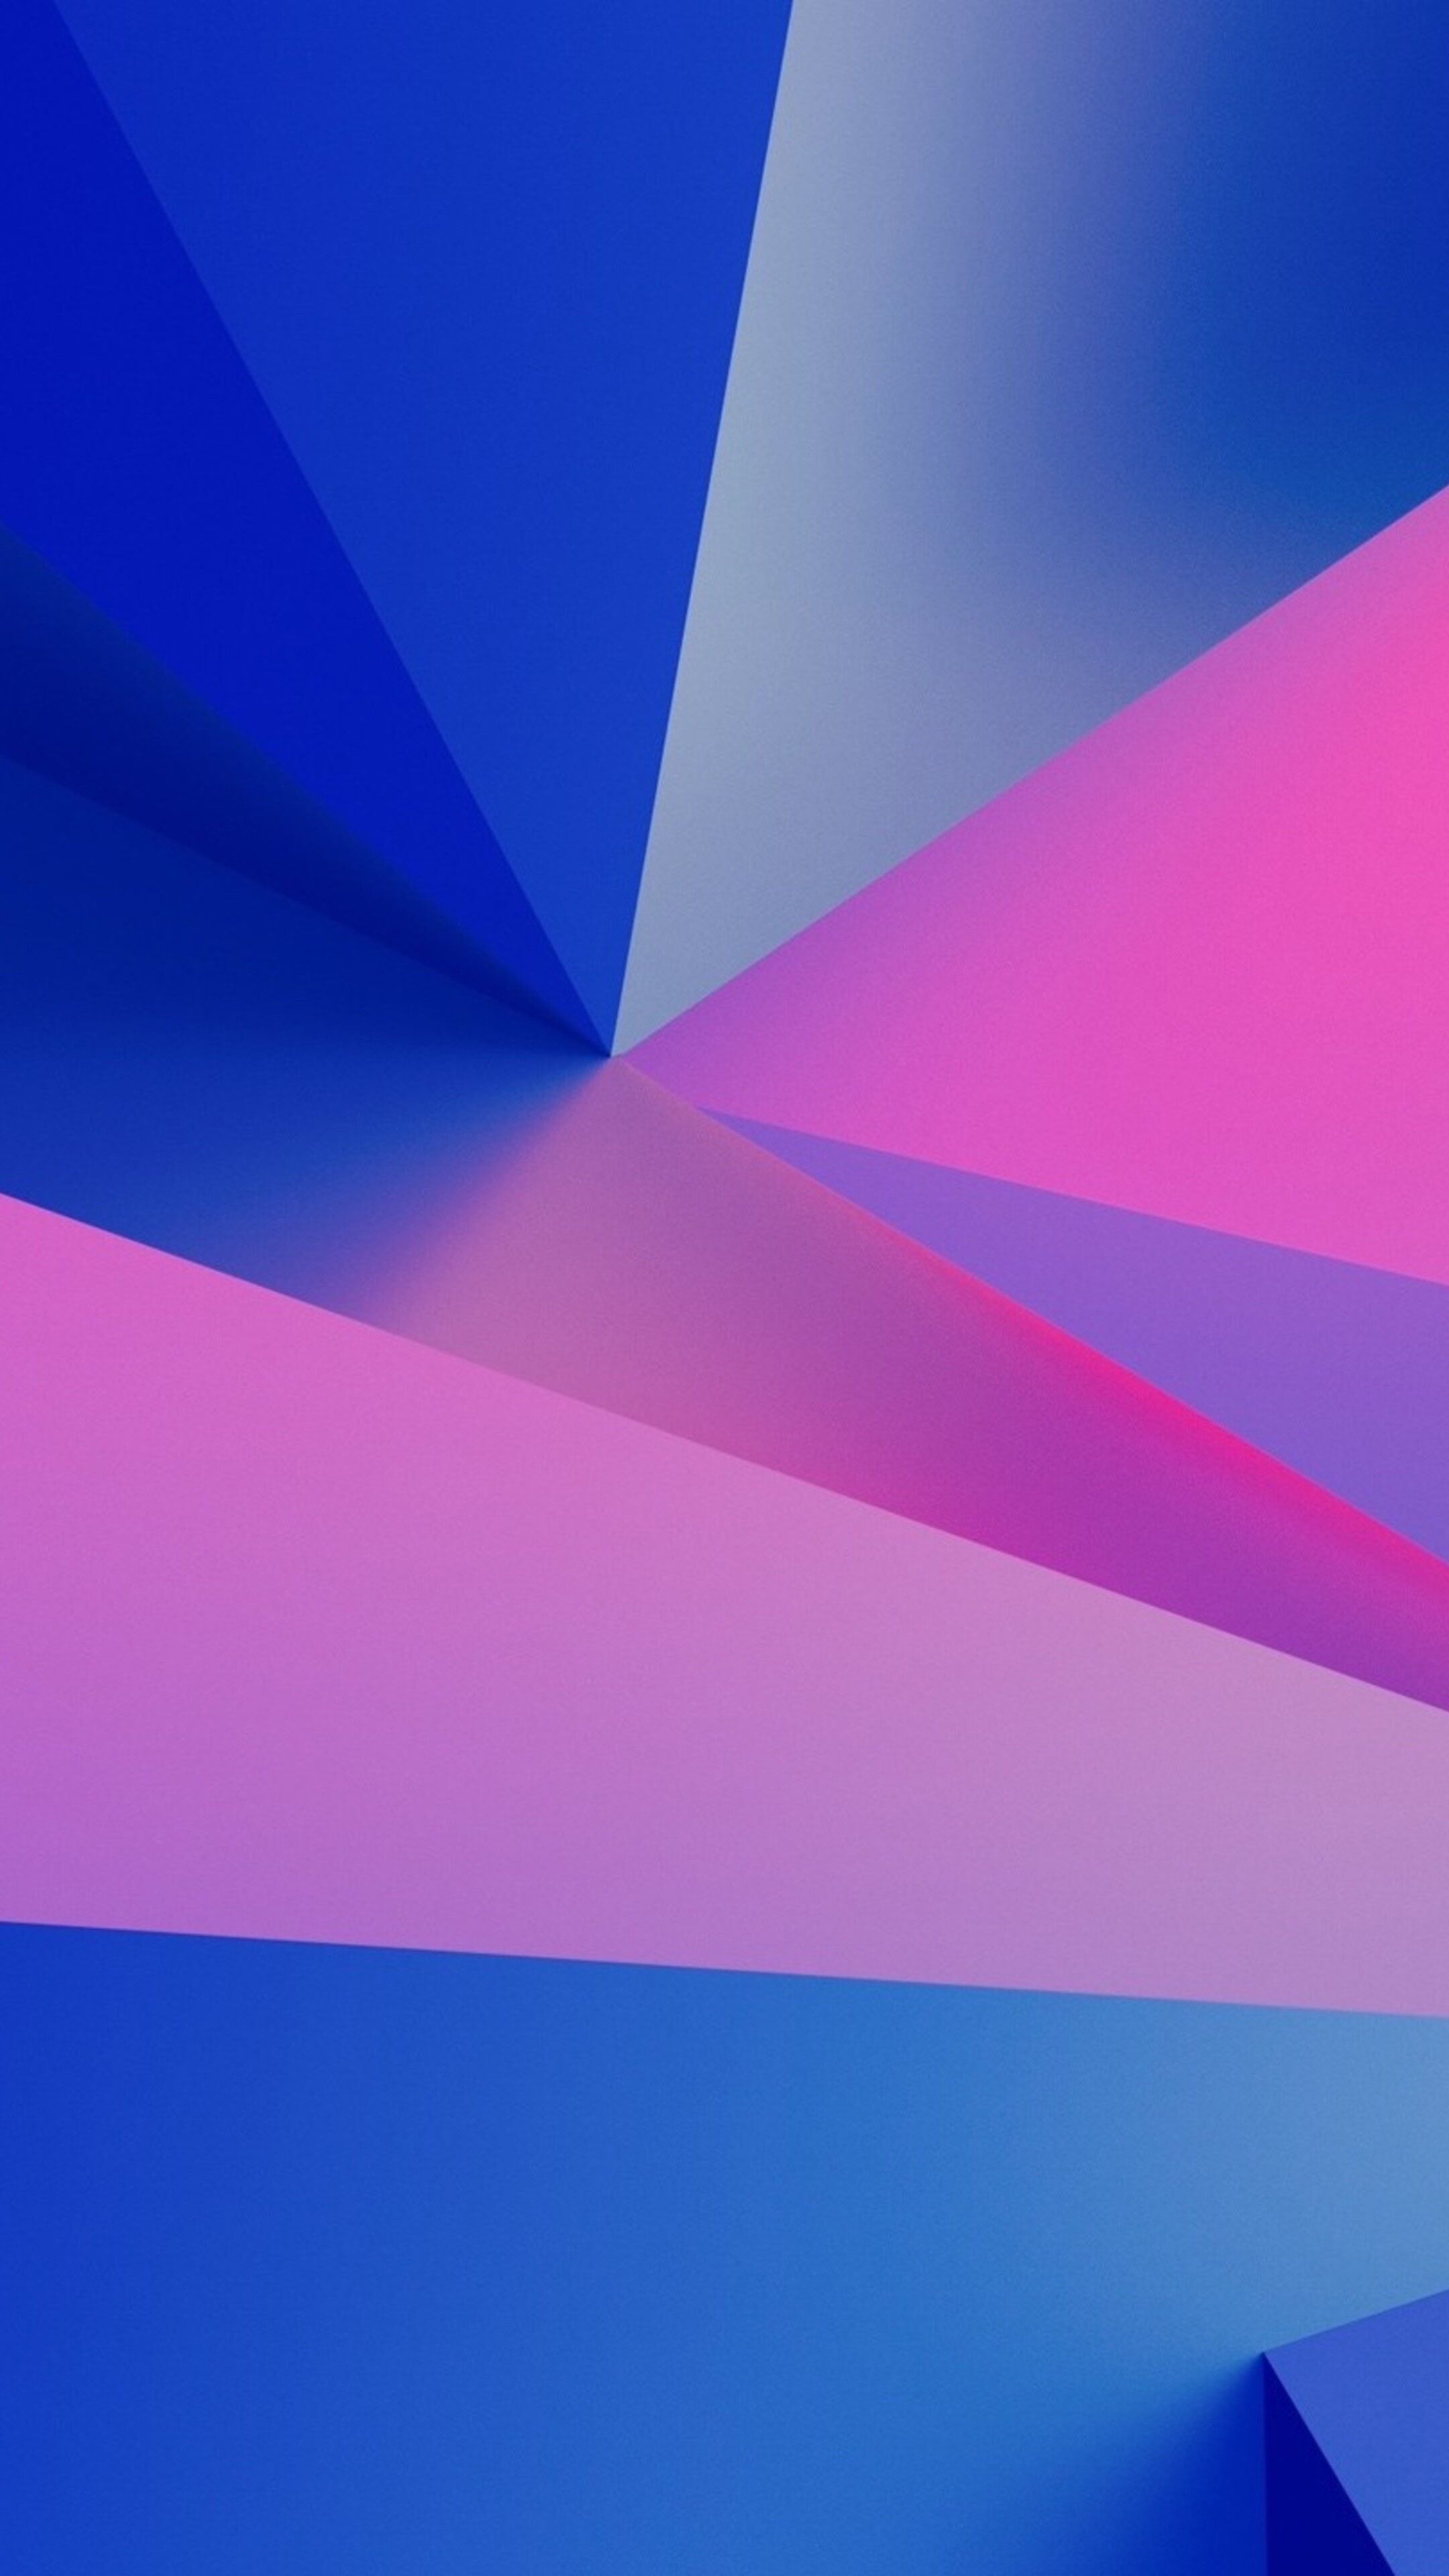 Geometric Abstract: Complementary angles, Triangles, Colorful, Obtuse angles. 2160x3840 4K Wallpaper.